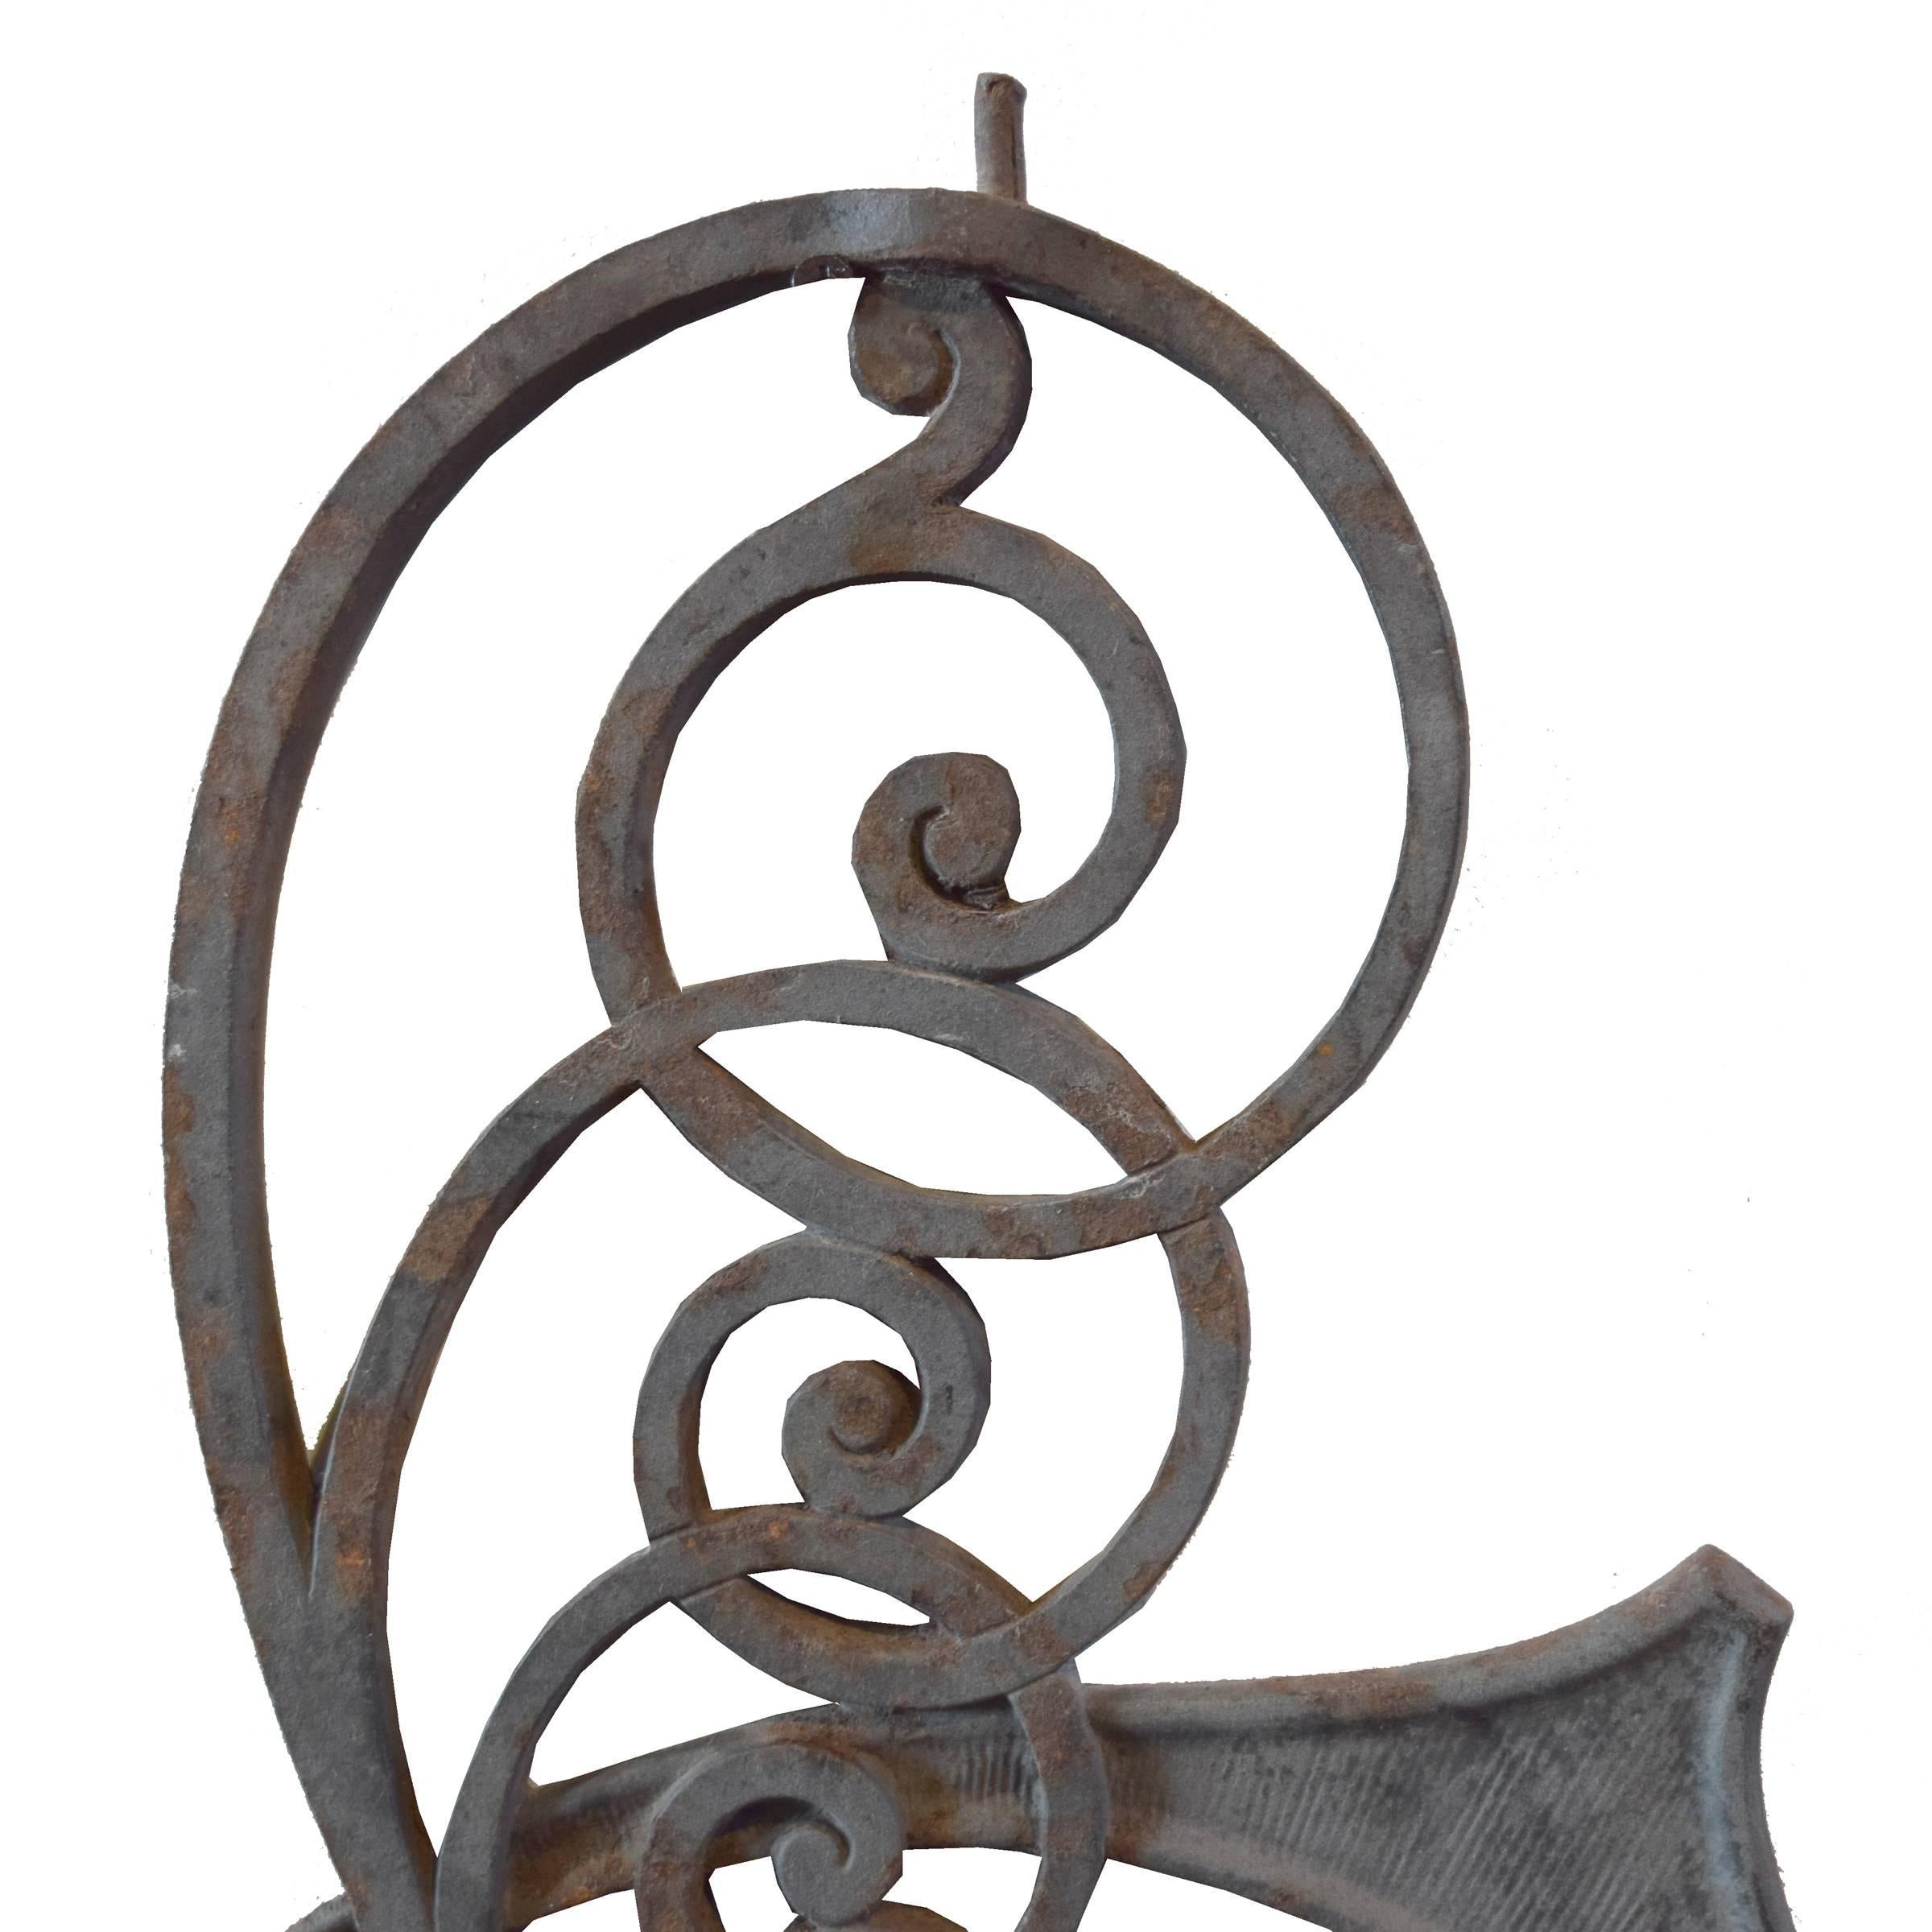 A wonderful cast iron stair balustrade from the Kansas City Board of Trade building, 1888-1968, by the firm of Burnham and Root. In 1886 the Board of Trade sponsored a design contest for a new building. 55 firms submitted designs and the nod